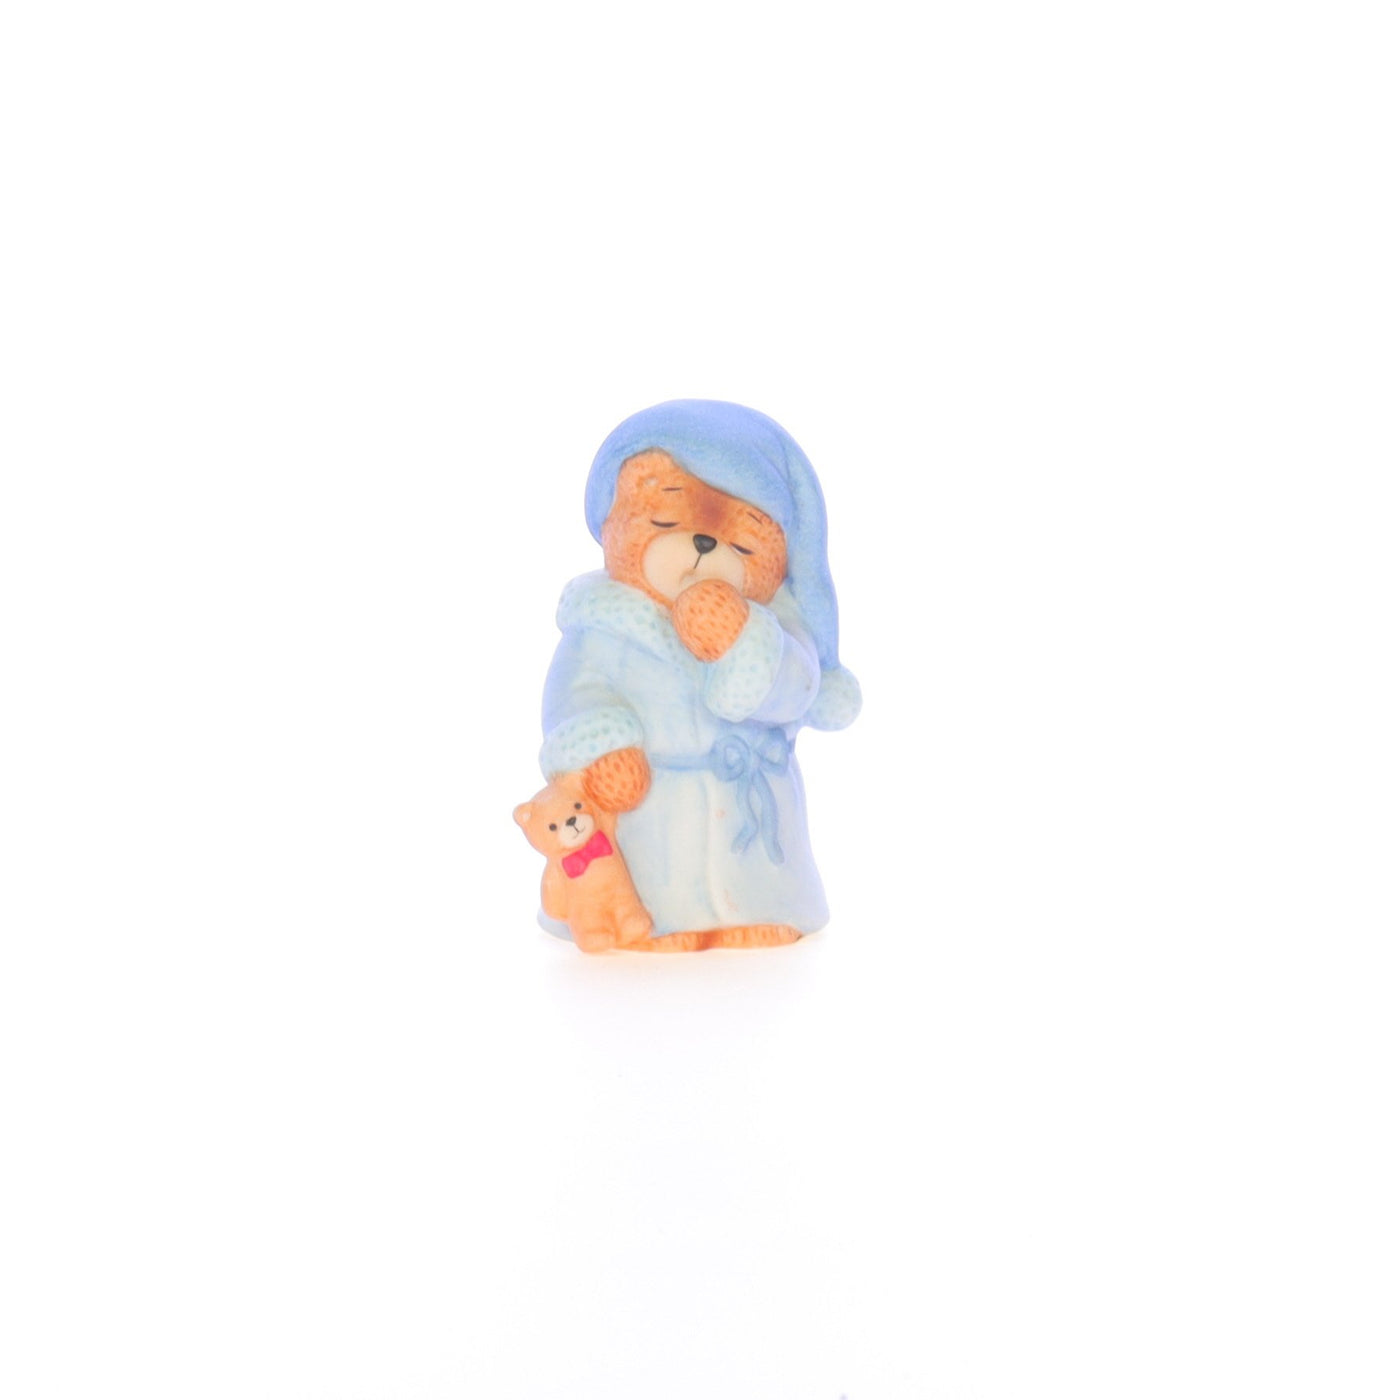 Lucy_And_Me_by_Lucy_Atwell_Porcelain_Figurine_Sleepy_Bear_in_Pajamas_Lucy_Unknown_046_01